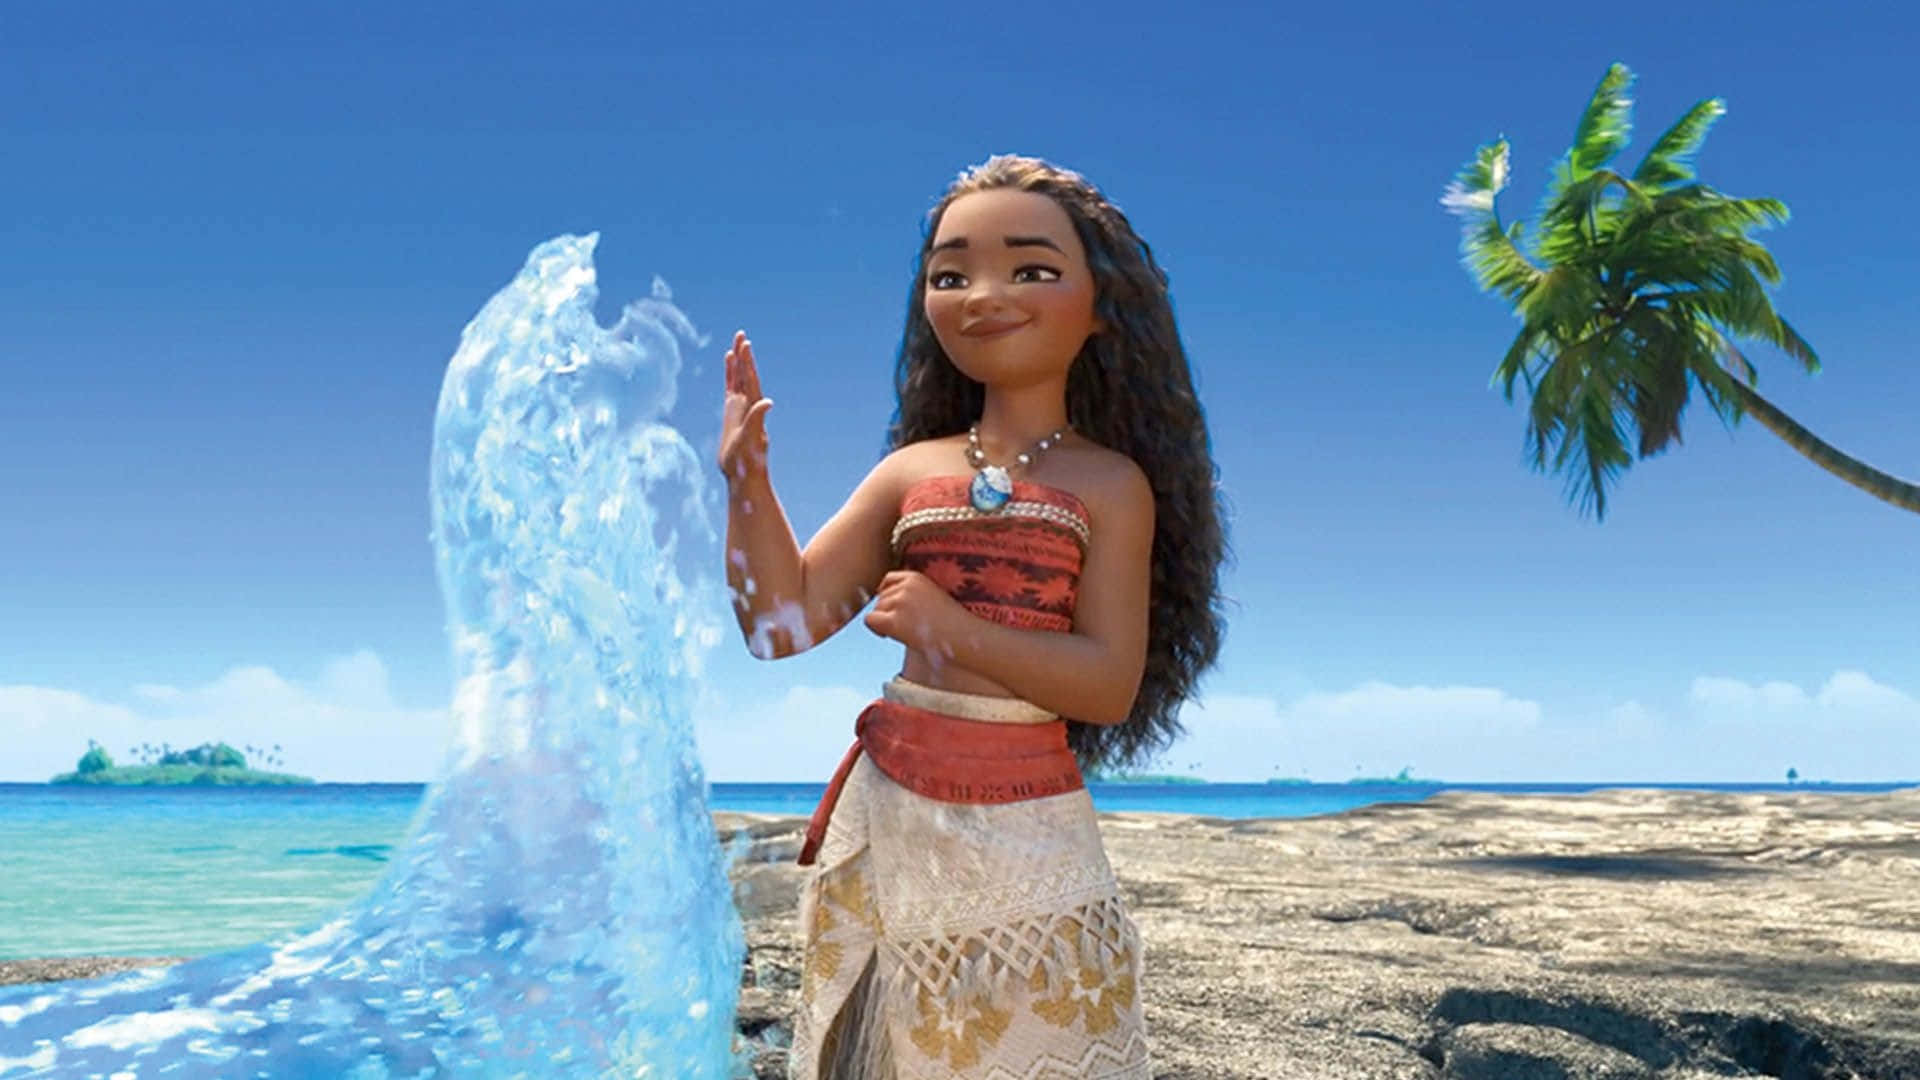 A timeless classic, Moana takes audiences on an adventure they won't forget!